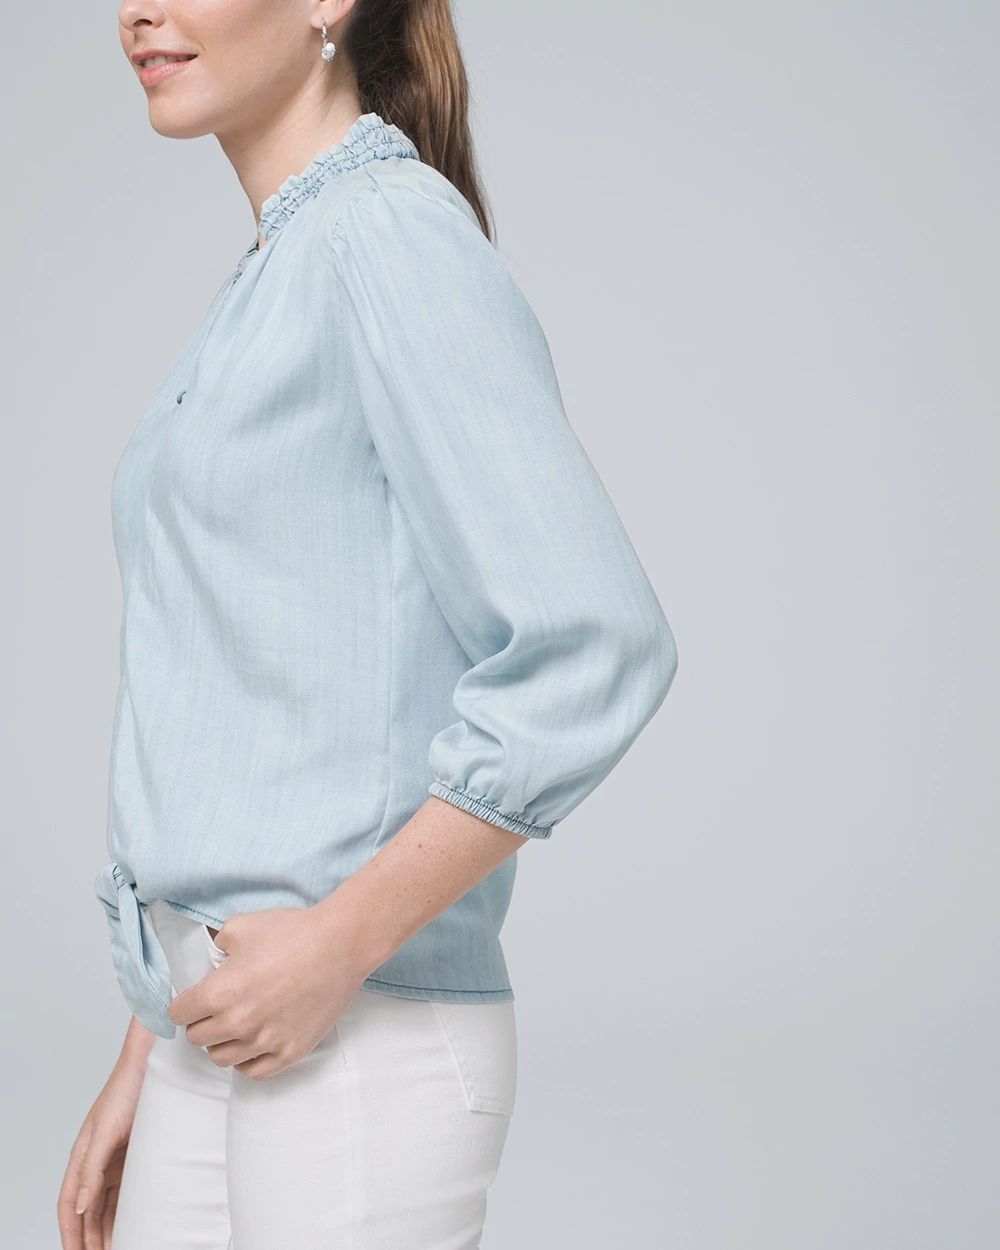 3/4-Sleeve Tie-Front Silky-Soft Denim Top click to view larger image.